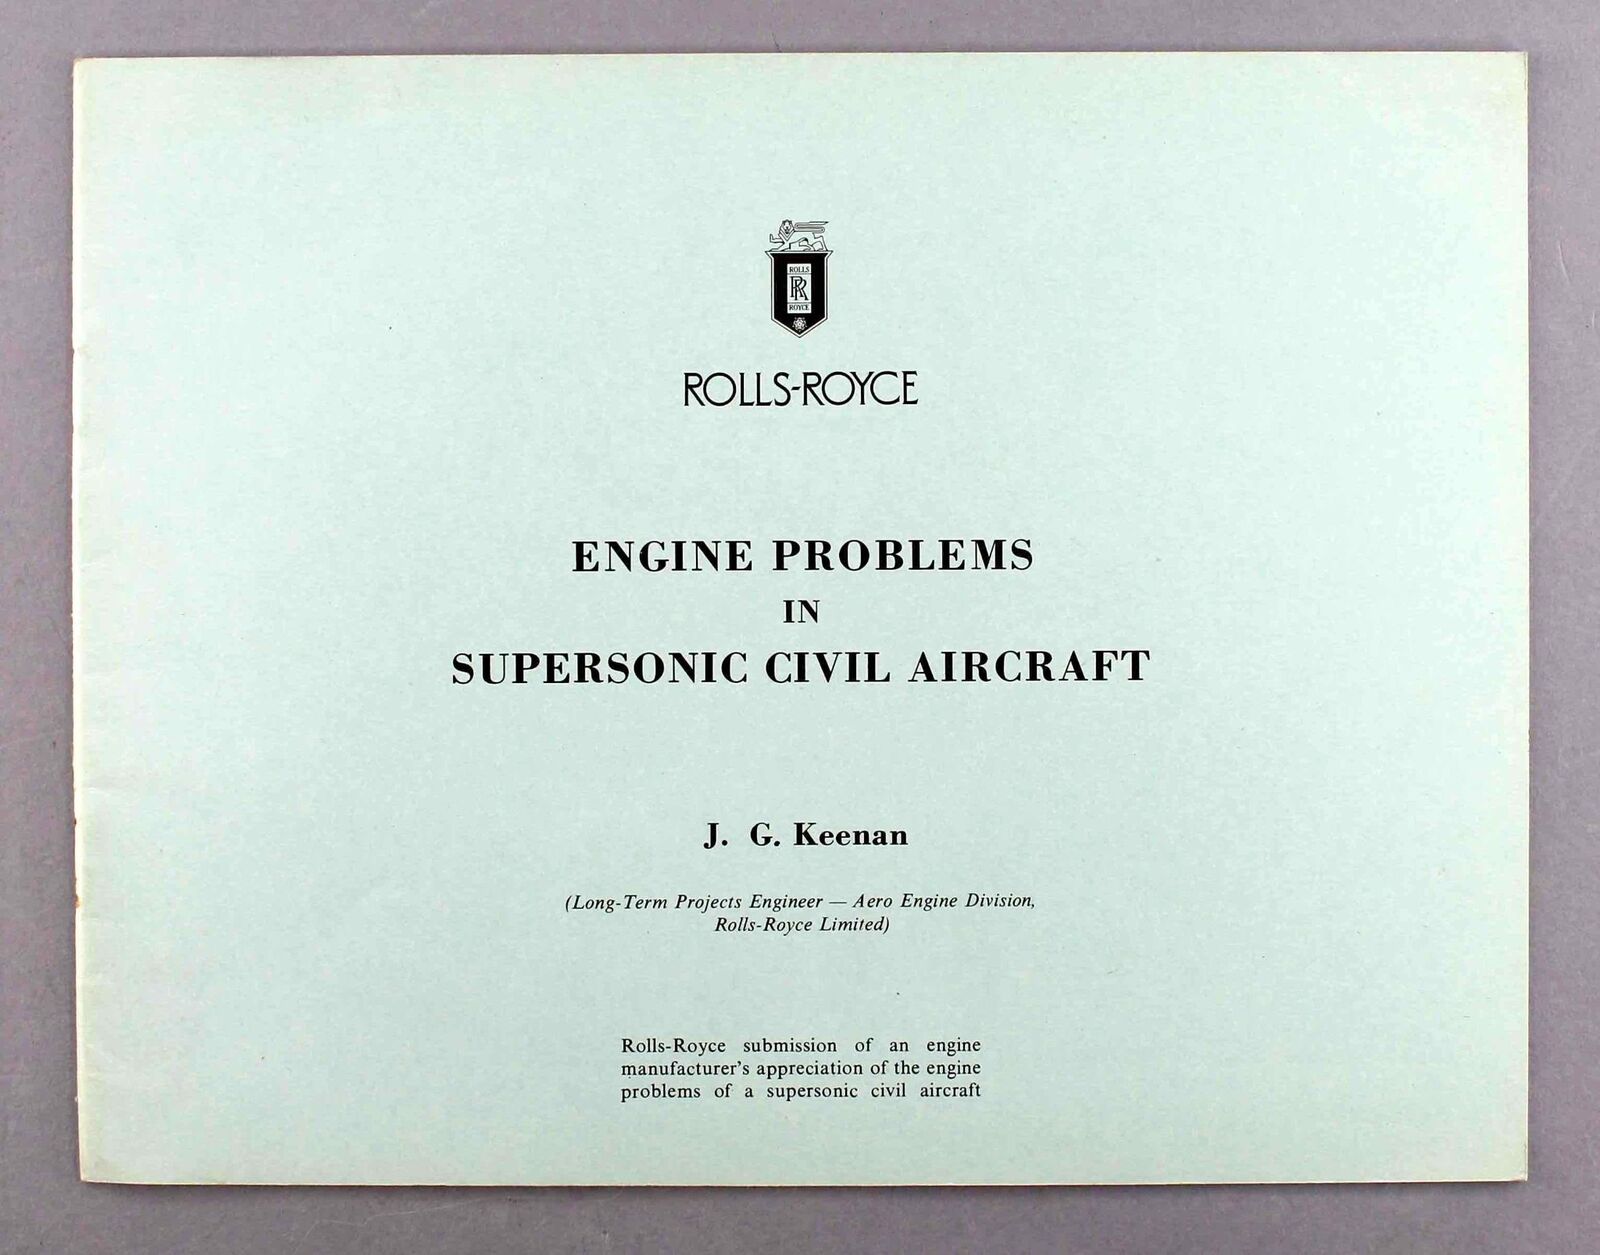 ROLLS-ROYCE ENGINE PROBLEMS IN SUPERSONIC CIVIL AIRCRAFT BROCHURE 1961 CONCORDE